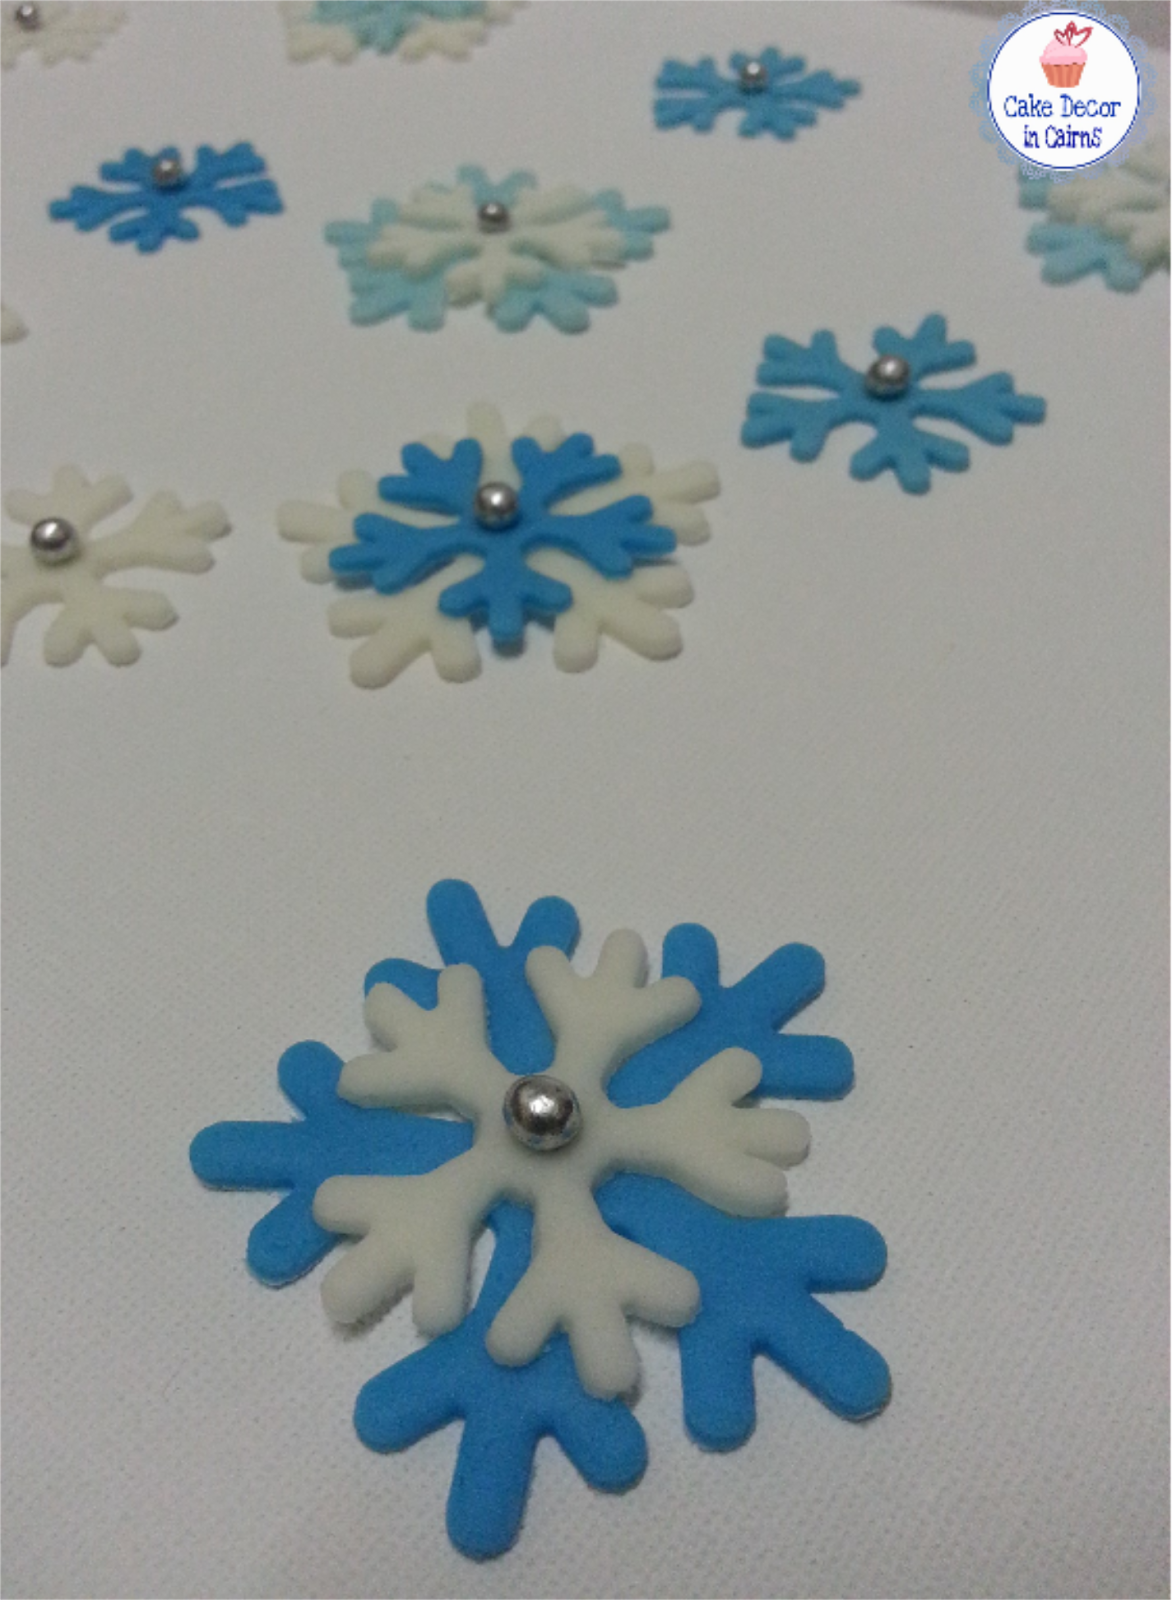 How to use Snowflake Fondant Cutters for Frozen theme Christmas